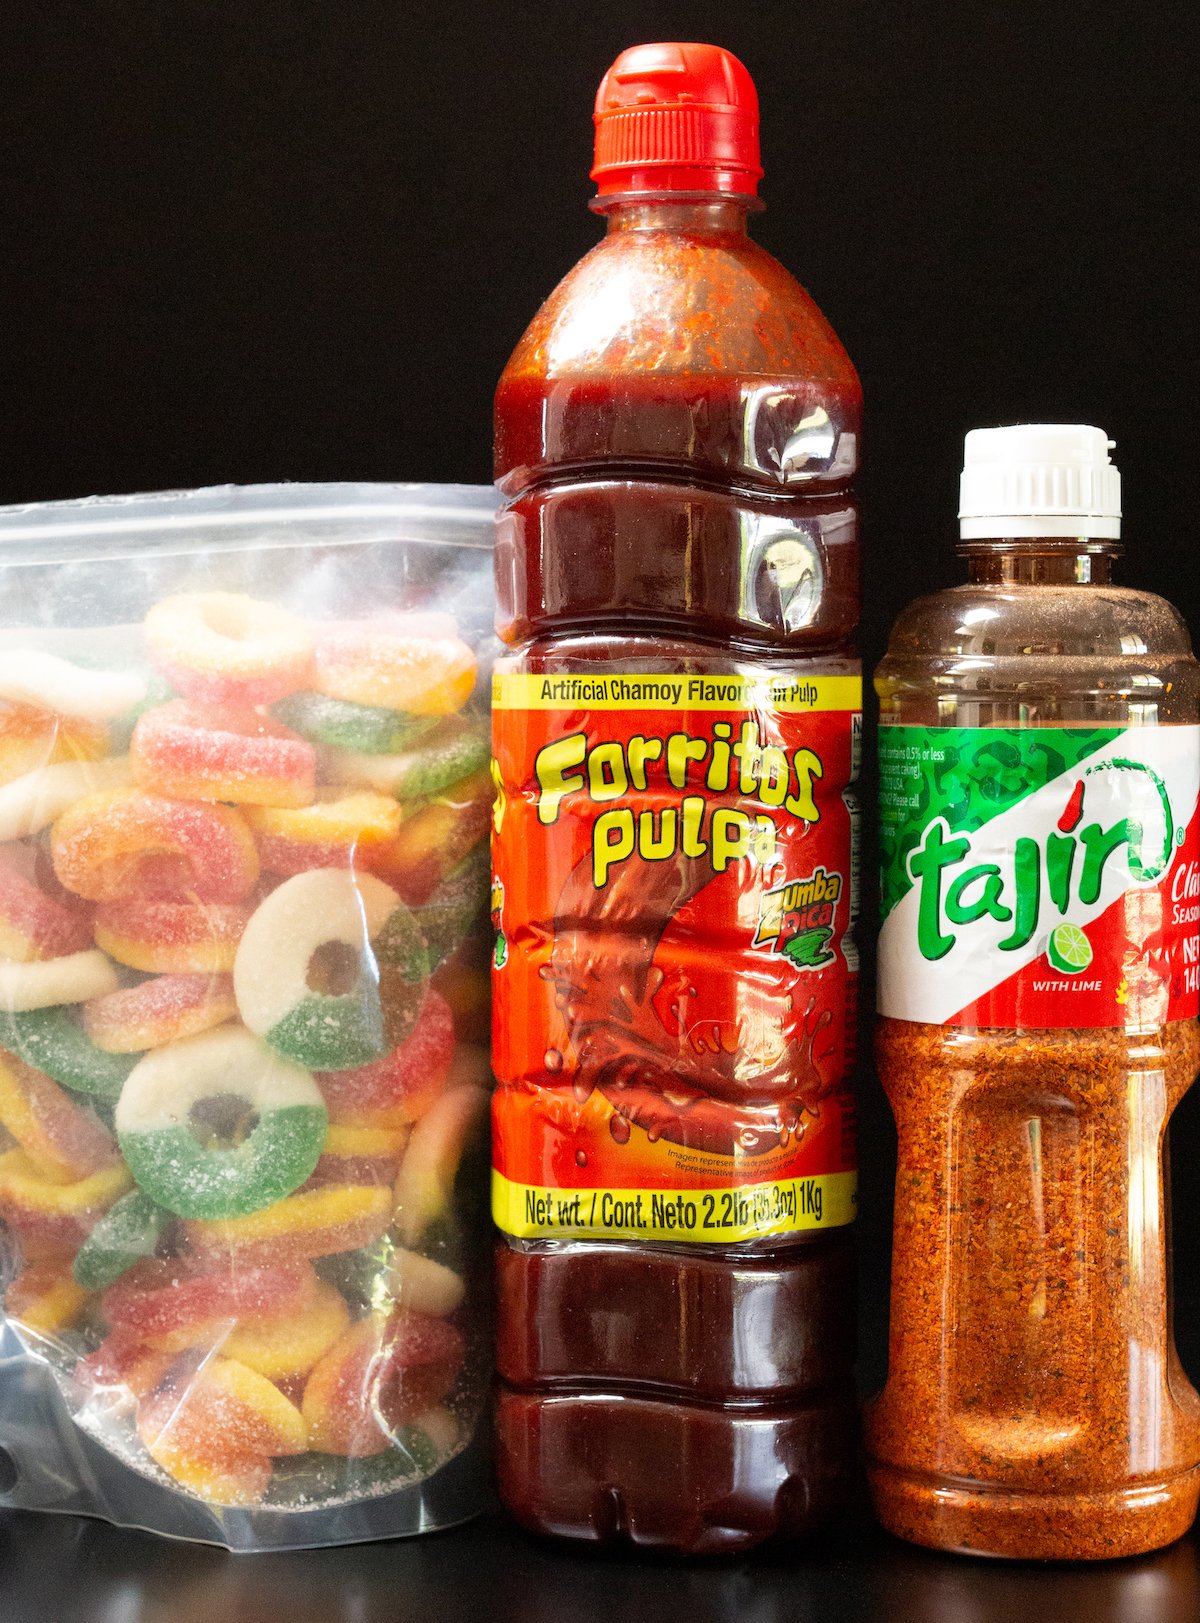 All the ingredients to make spicy Mexican candy - gummy candy, Chamoy, and Tajin.